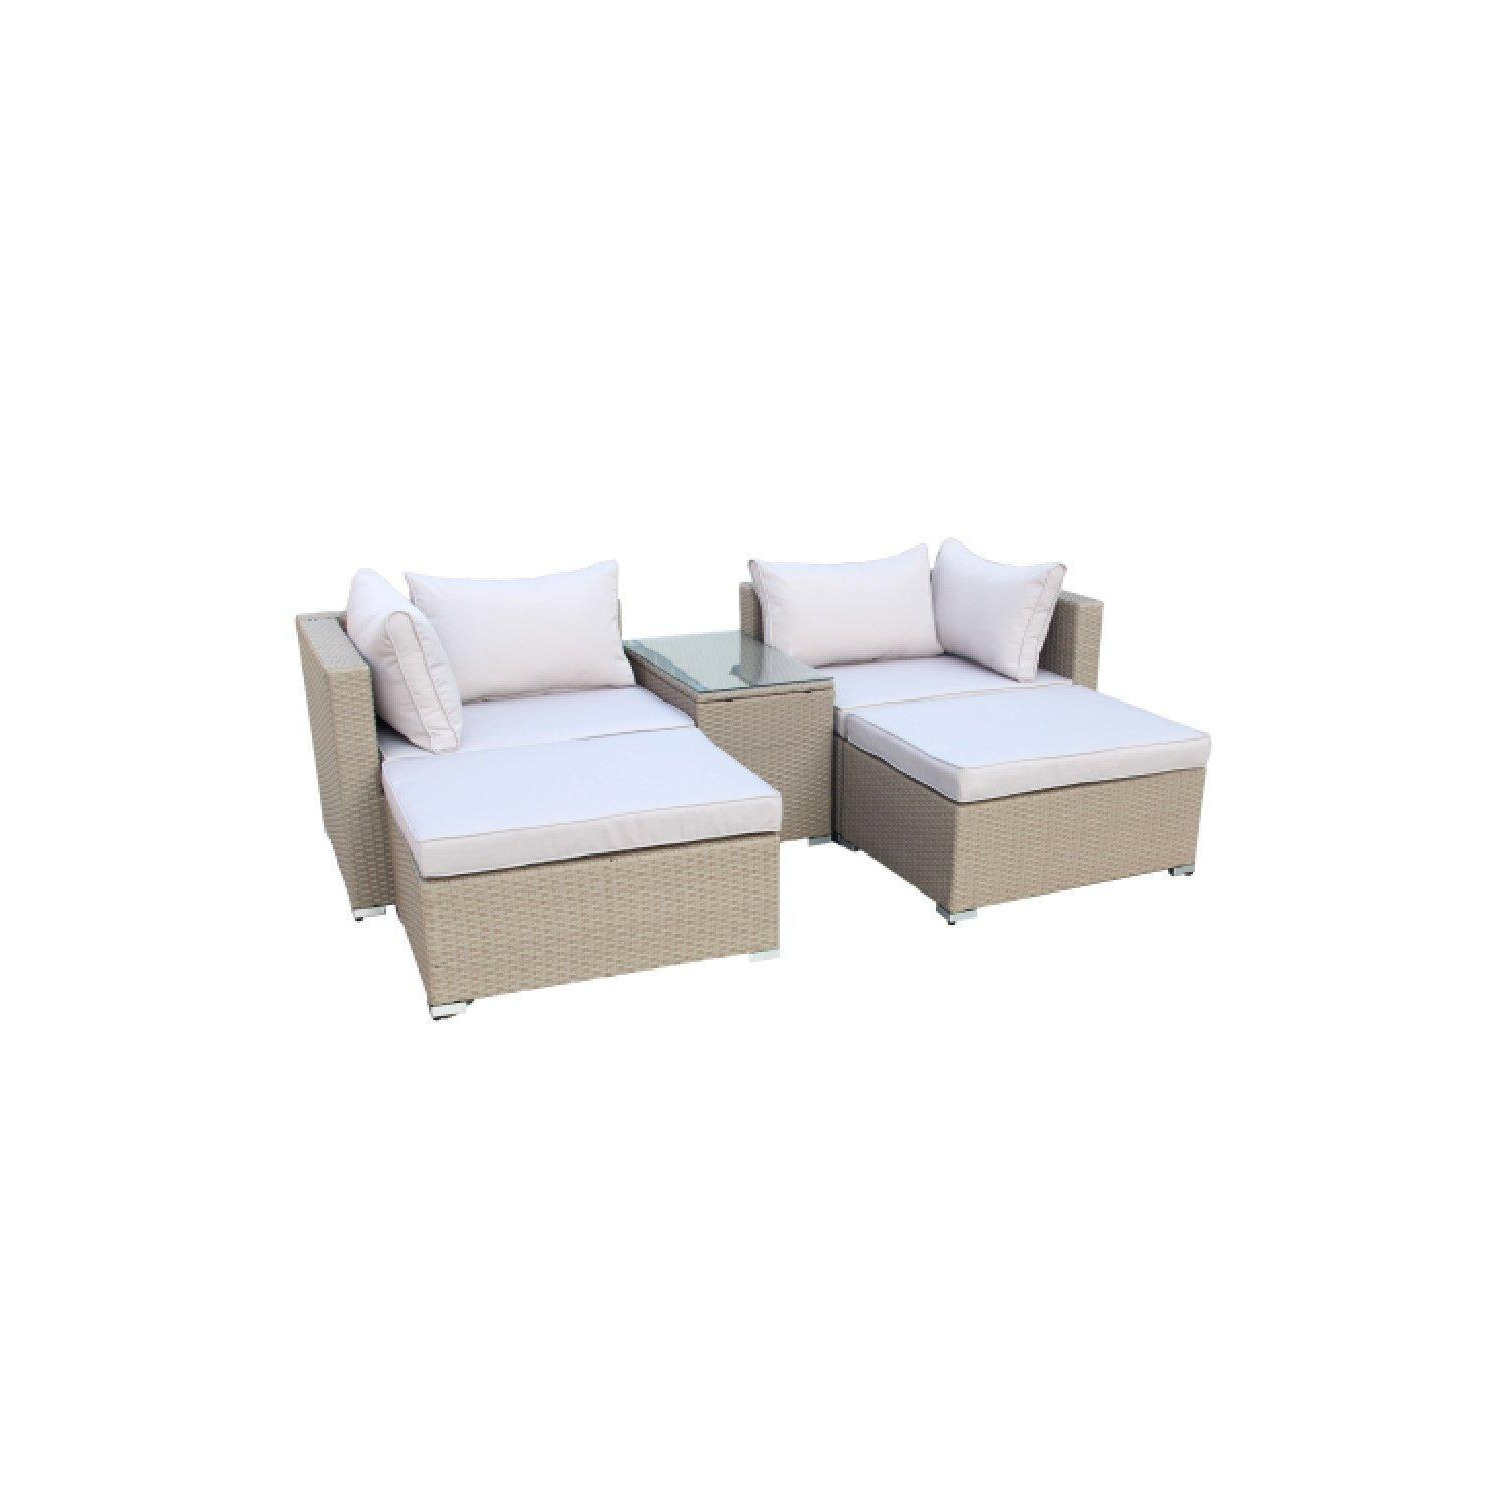 Roma Modular Outdoor Rattan Garden Lounge Set with Removable Cushions 5pc - image 1